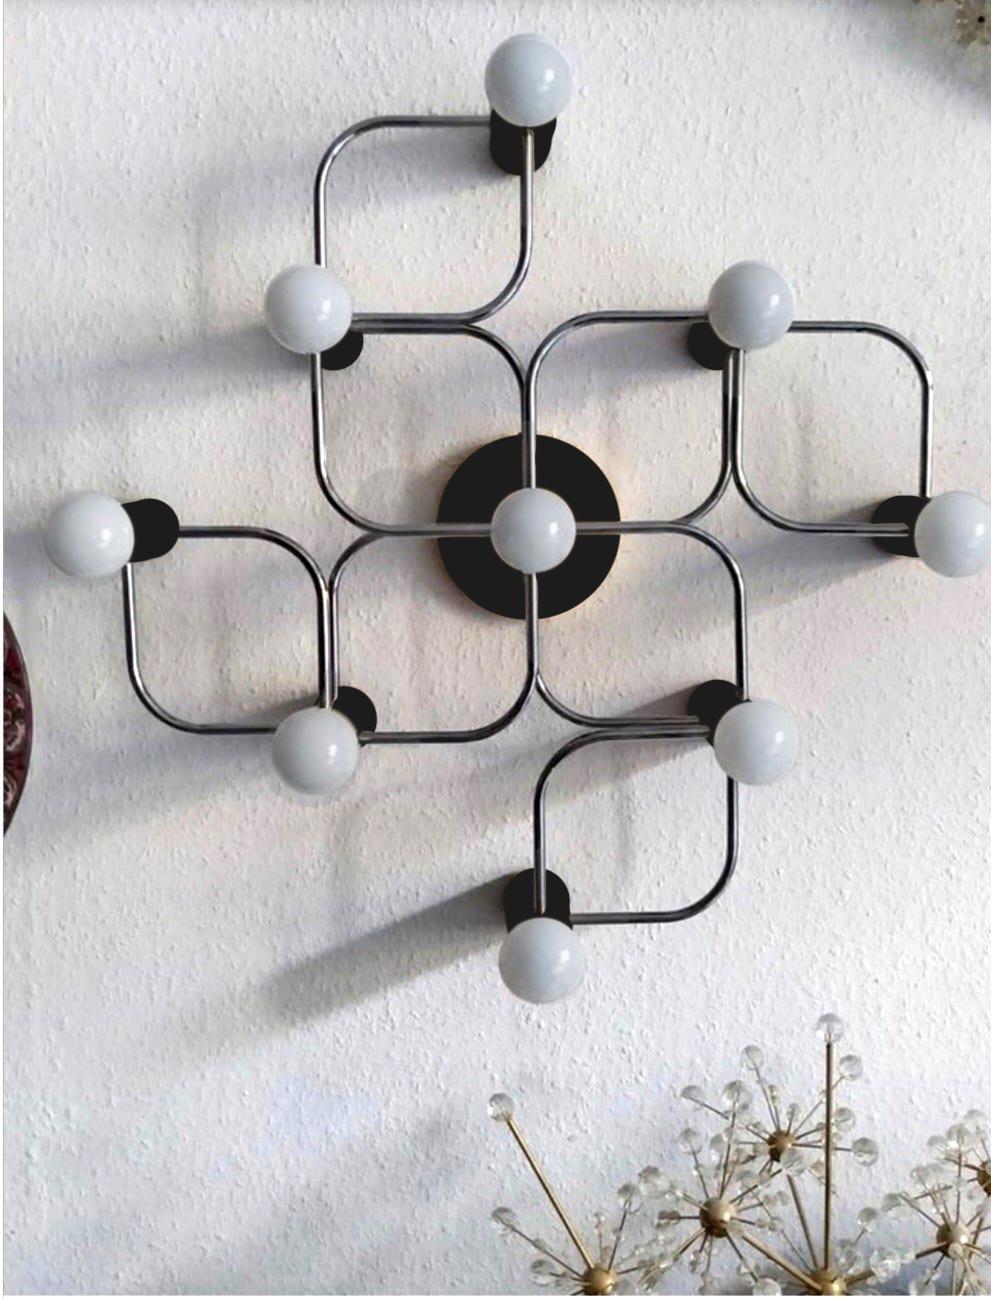 Large sculptural Sciolari style ceiling or wall flush mount by Leola. Black and chrome version.
Germany, 1960s.